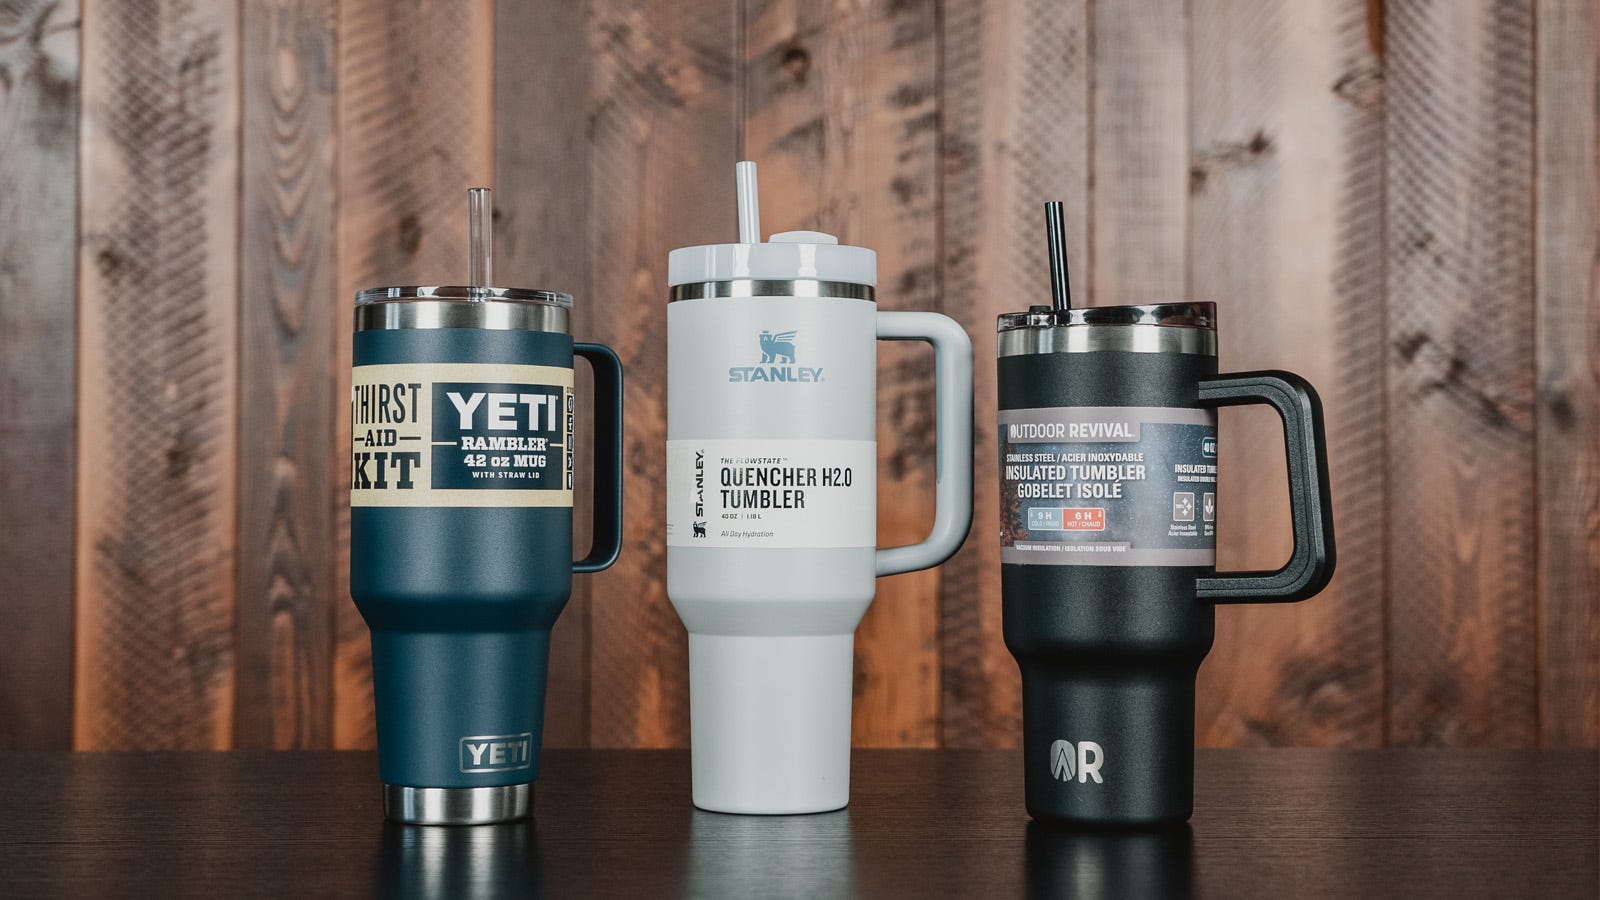 A Yeti Rambler, a Stanley Quencher, and the Outdoor Revival Tumbler sitting next to each other